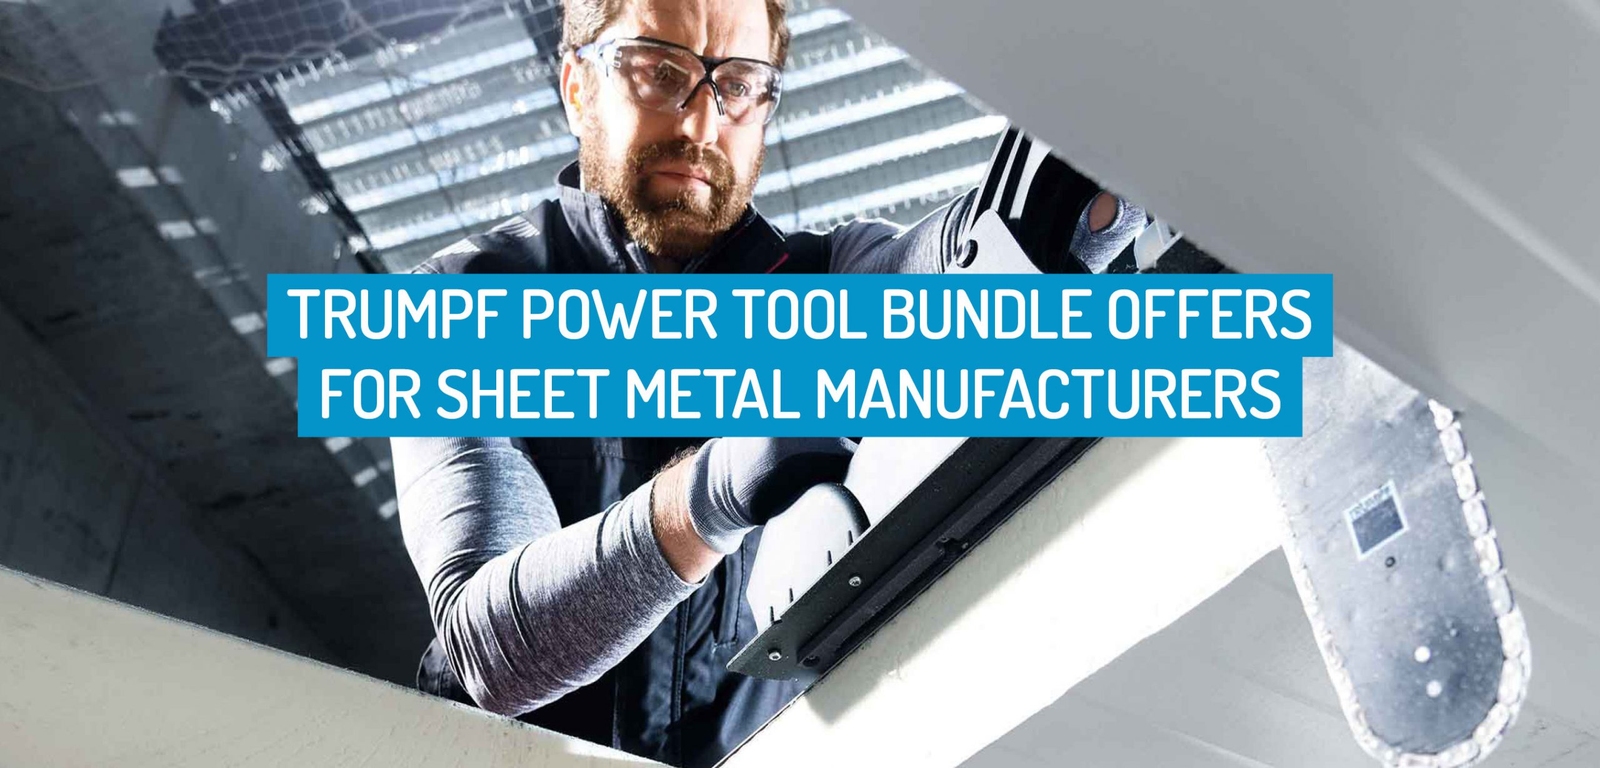 TRUMPF Power Tool Bundle Offers for Sheet Metal Manufacturers